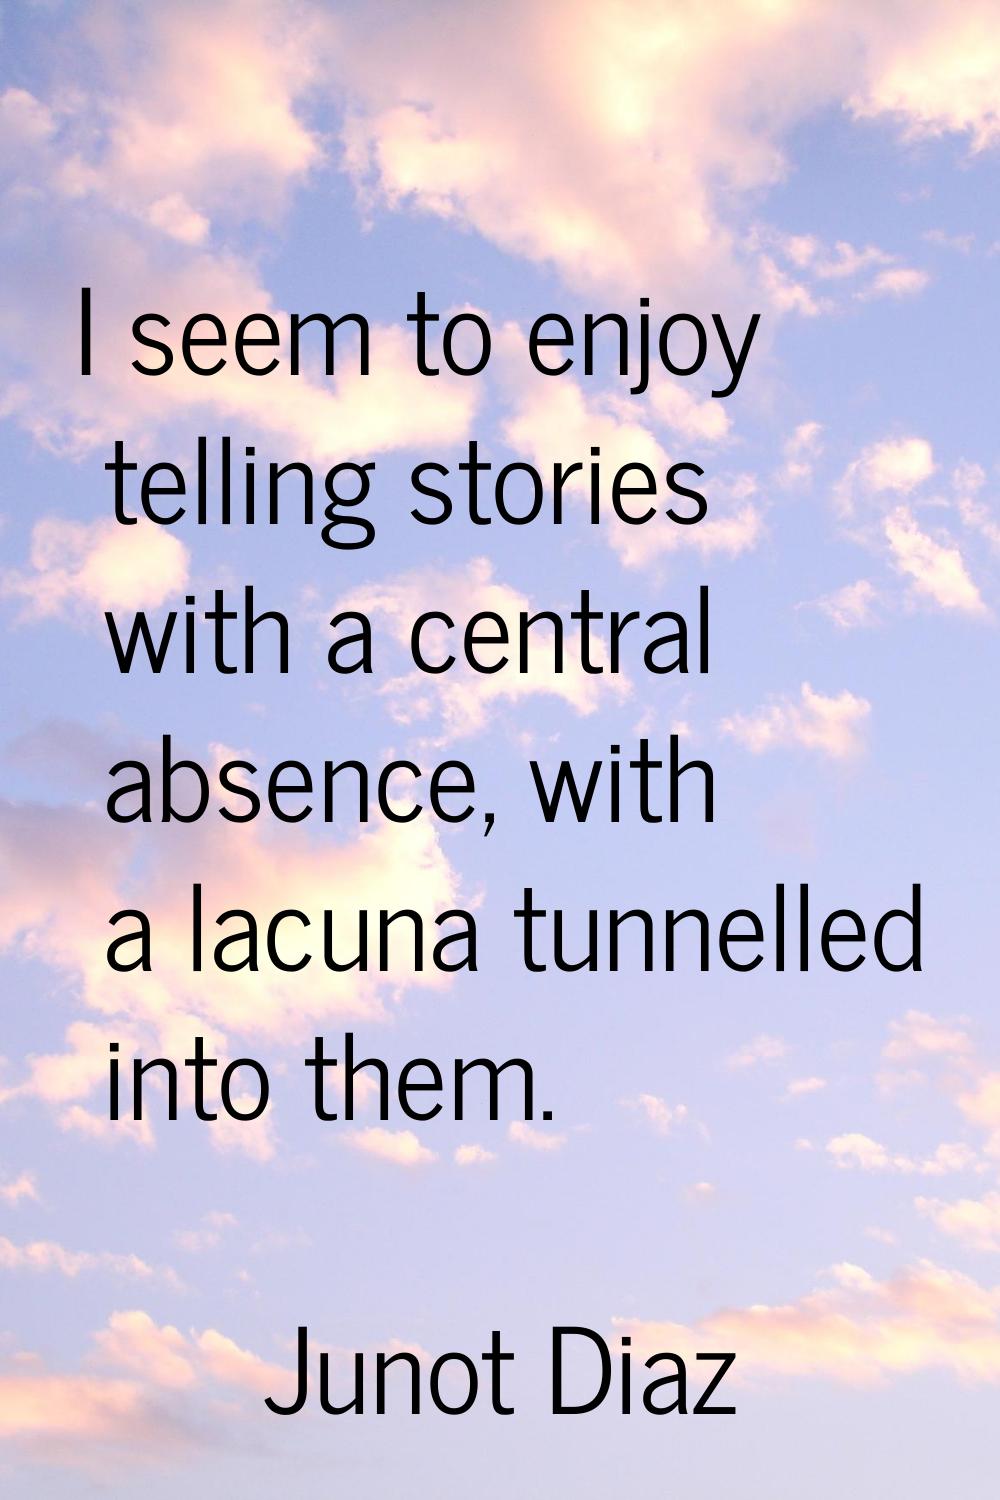 I seem to enjoy telling stories with a central absence, with a lacuna tunnelled into them.